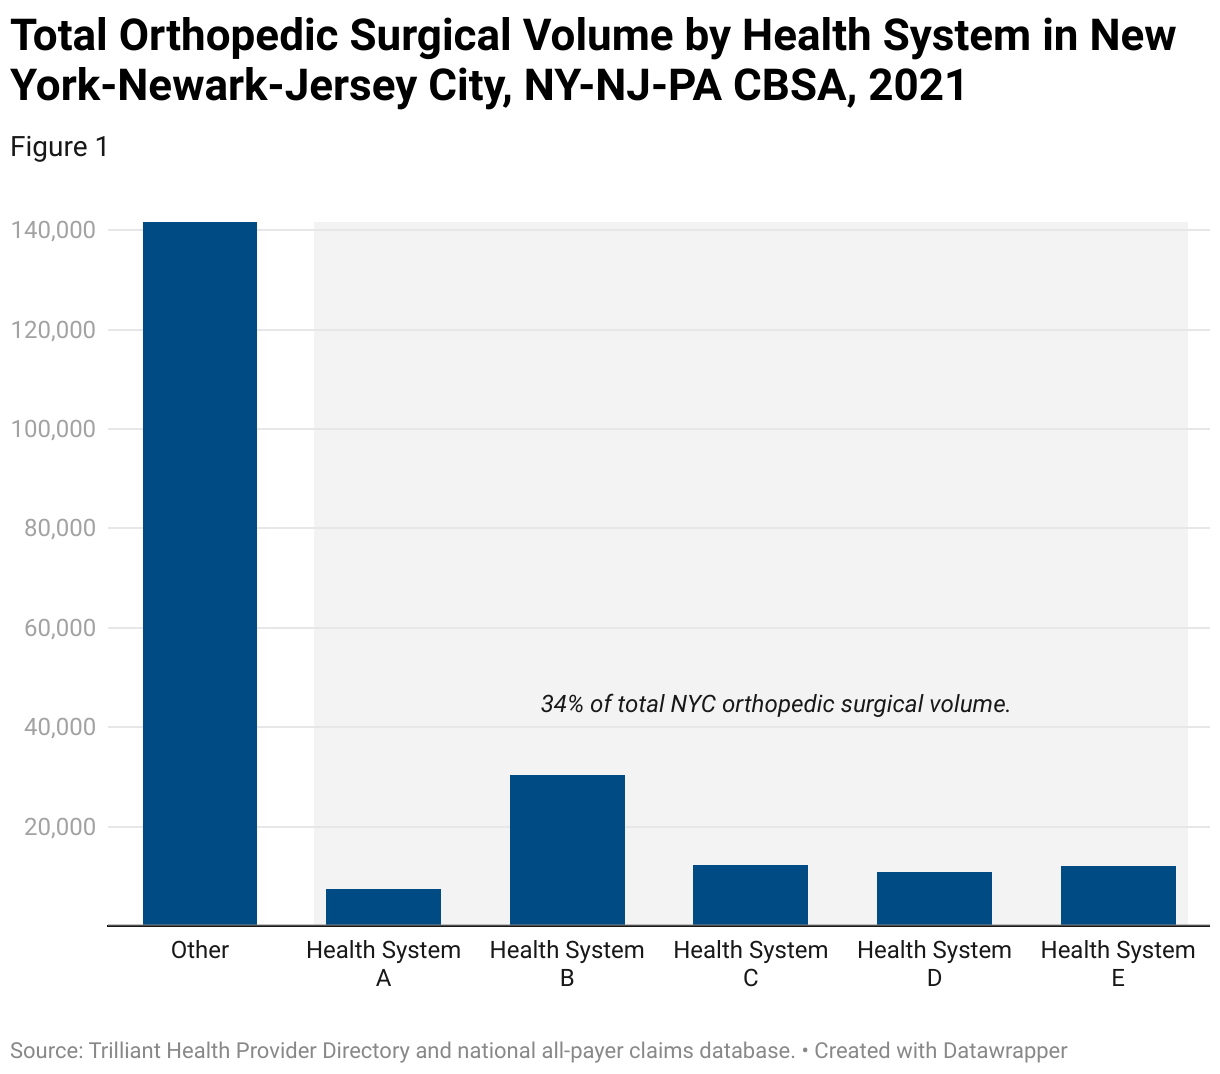 Bar chart showing the total orthopedic surgical volume by health system in 2021 for the top five provider organizations in the New York-Newark-Jersey City CBSA